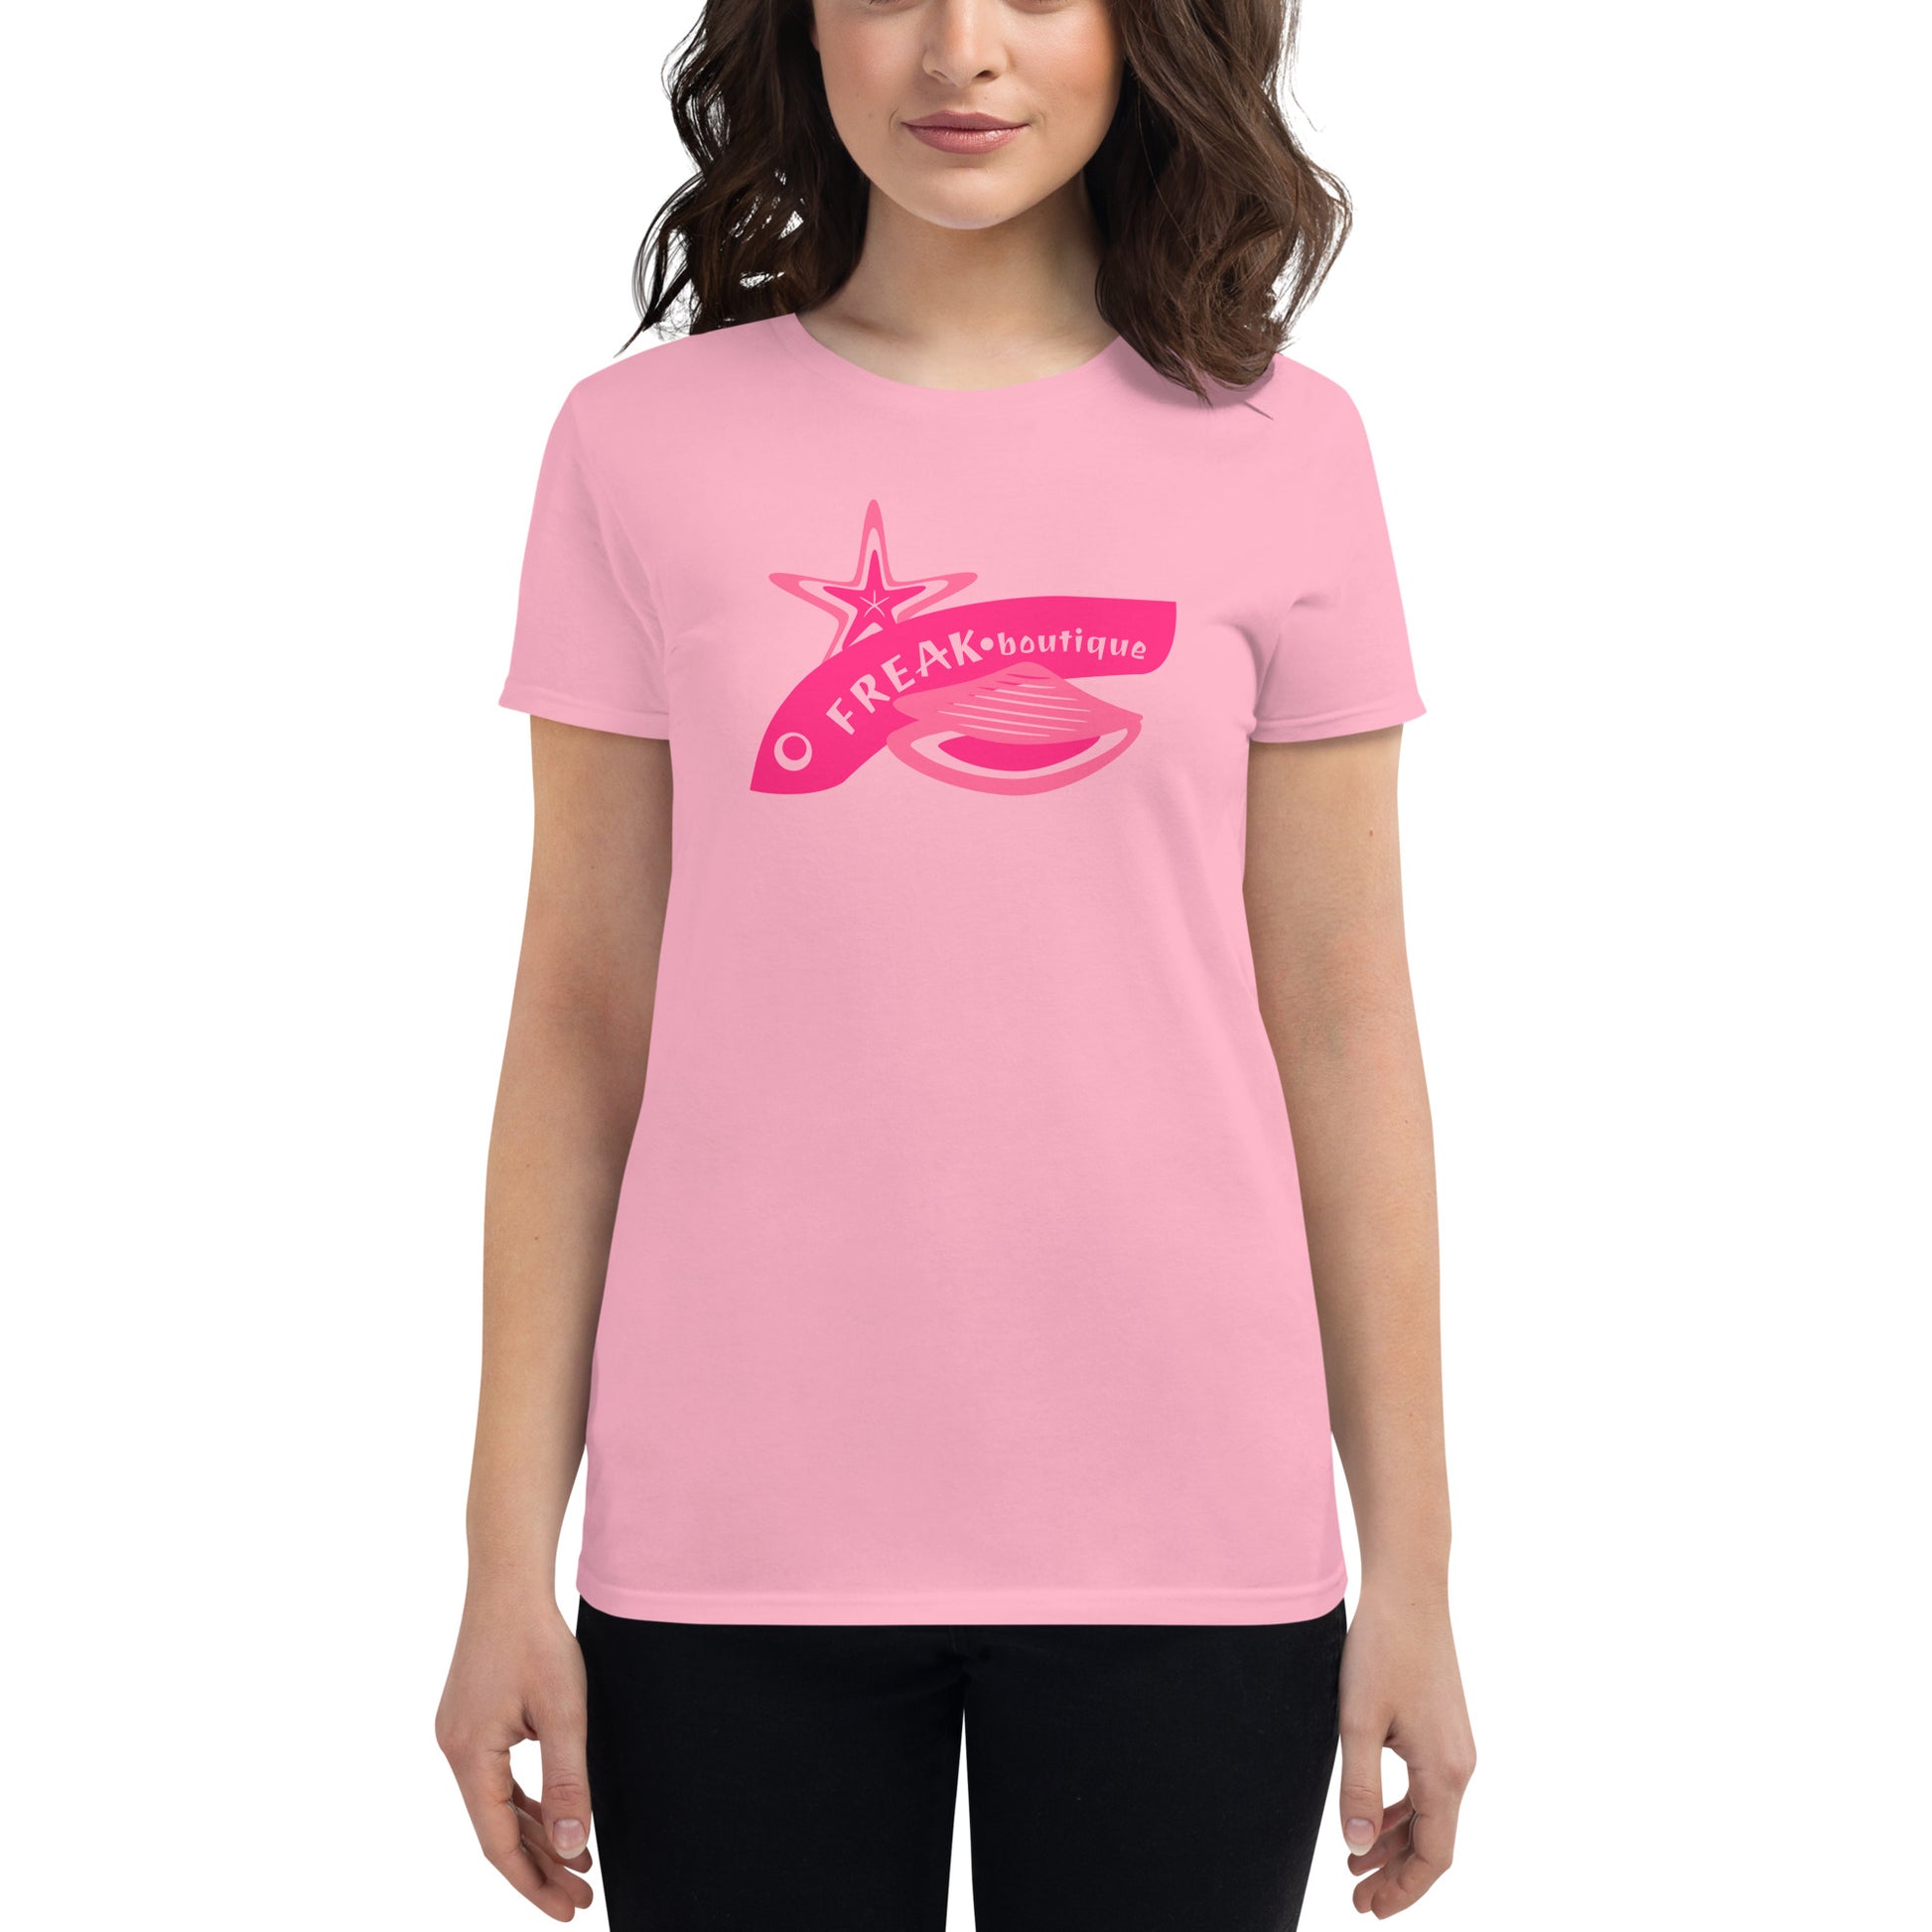 Triangle amoureux logo pink women's t-shirt on model